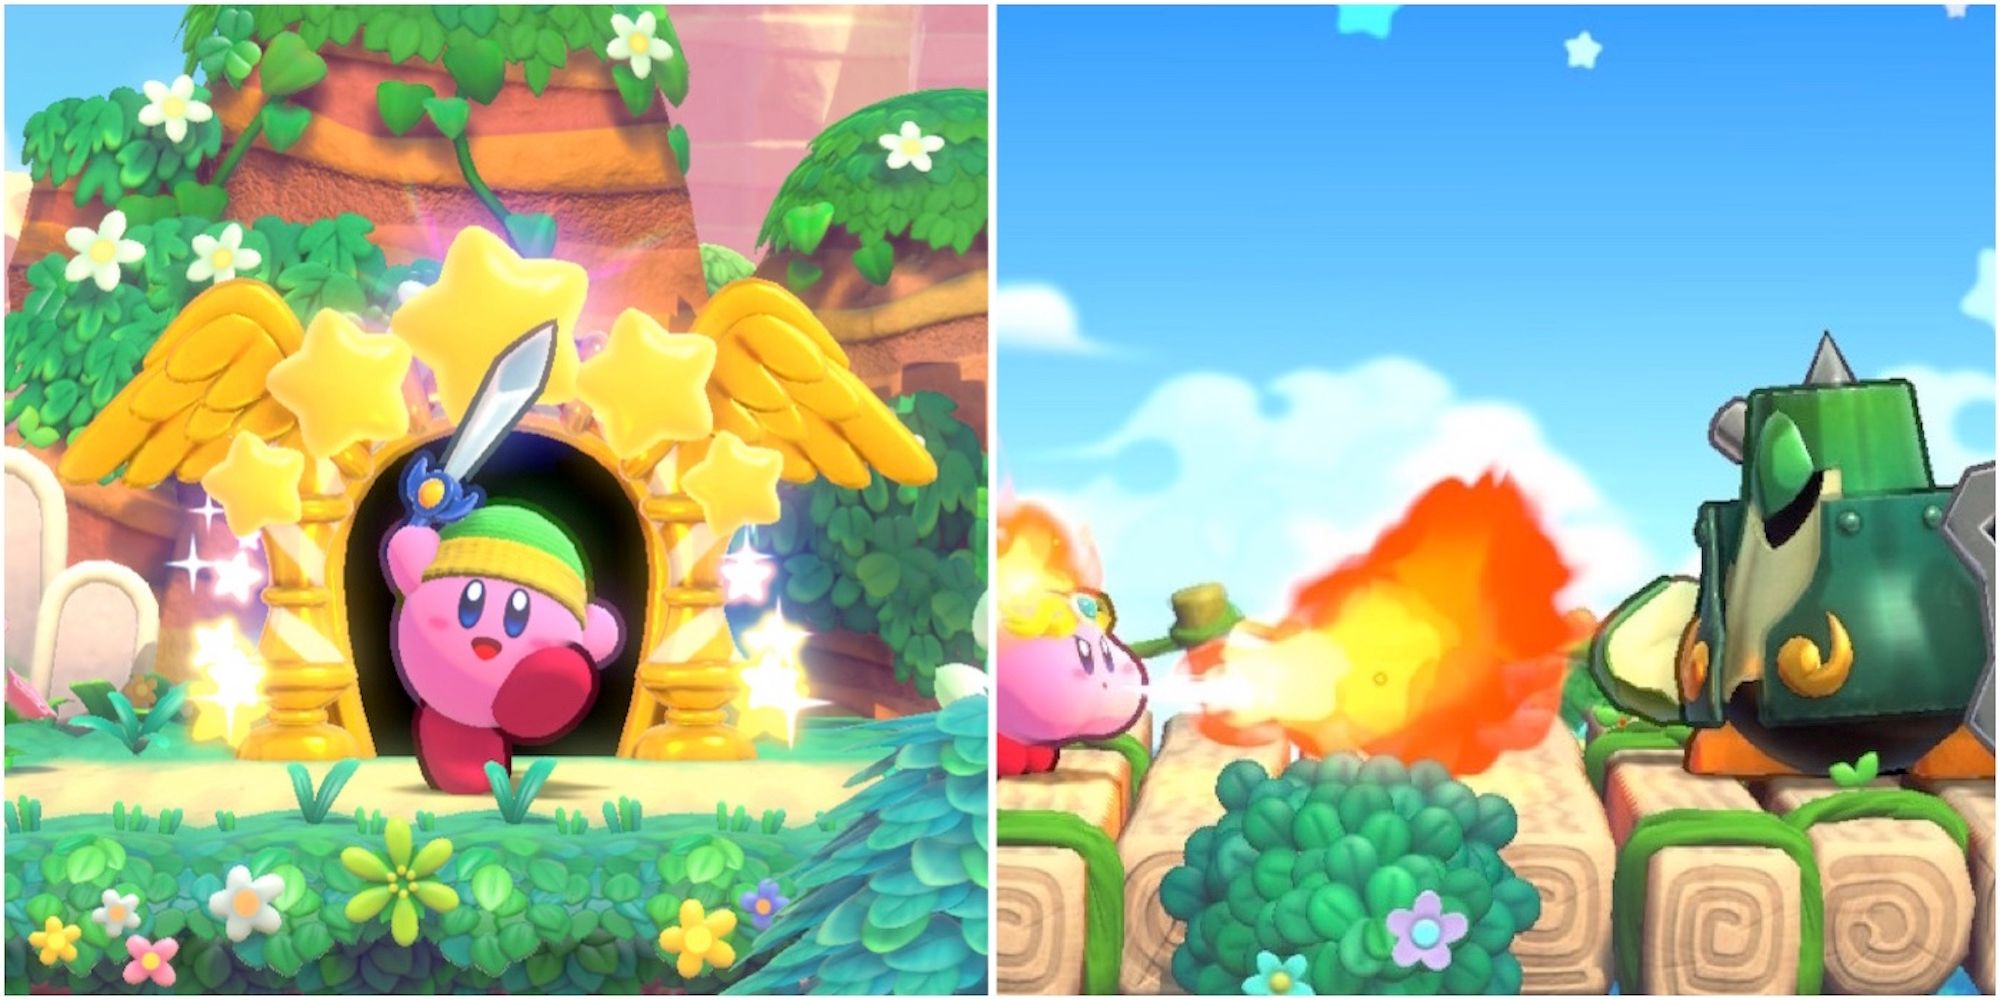 Sword Kirby and fighting enemies in Kirby's Return to Dream Land Deluxe